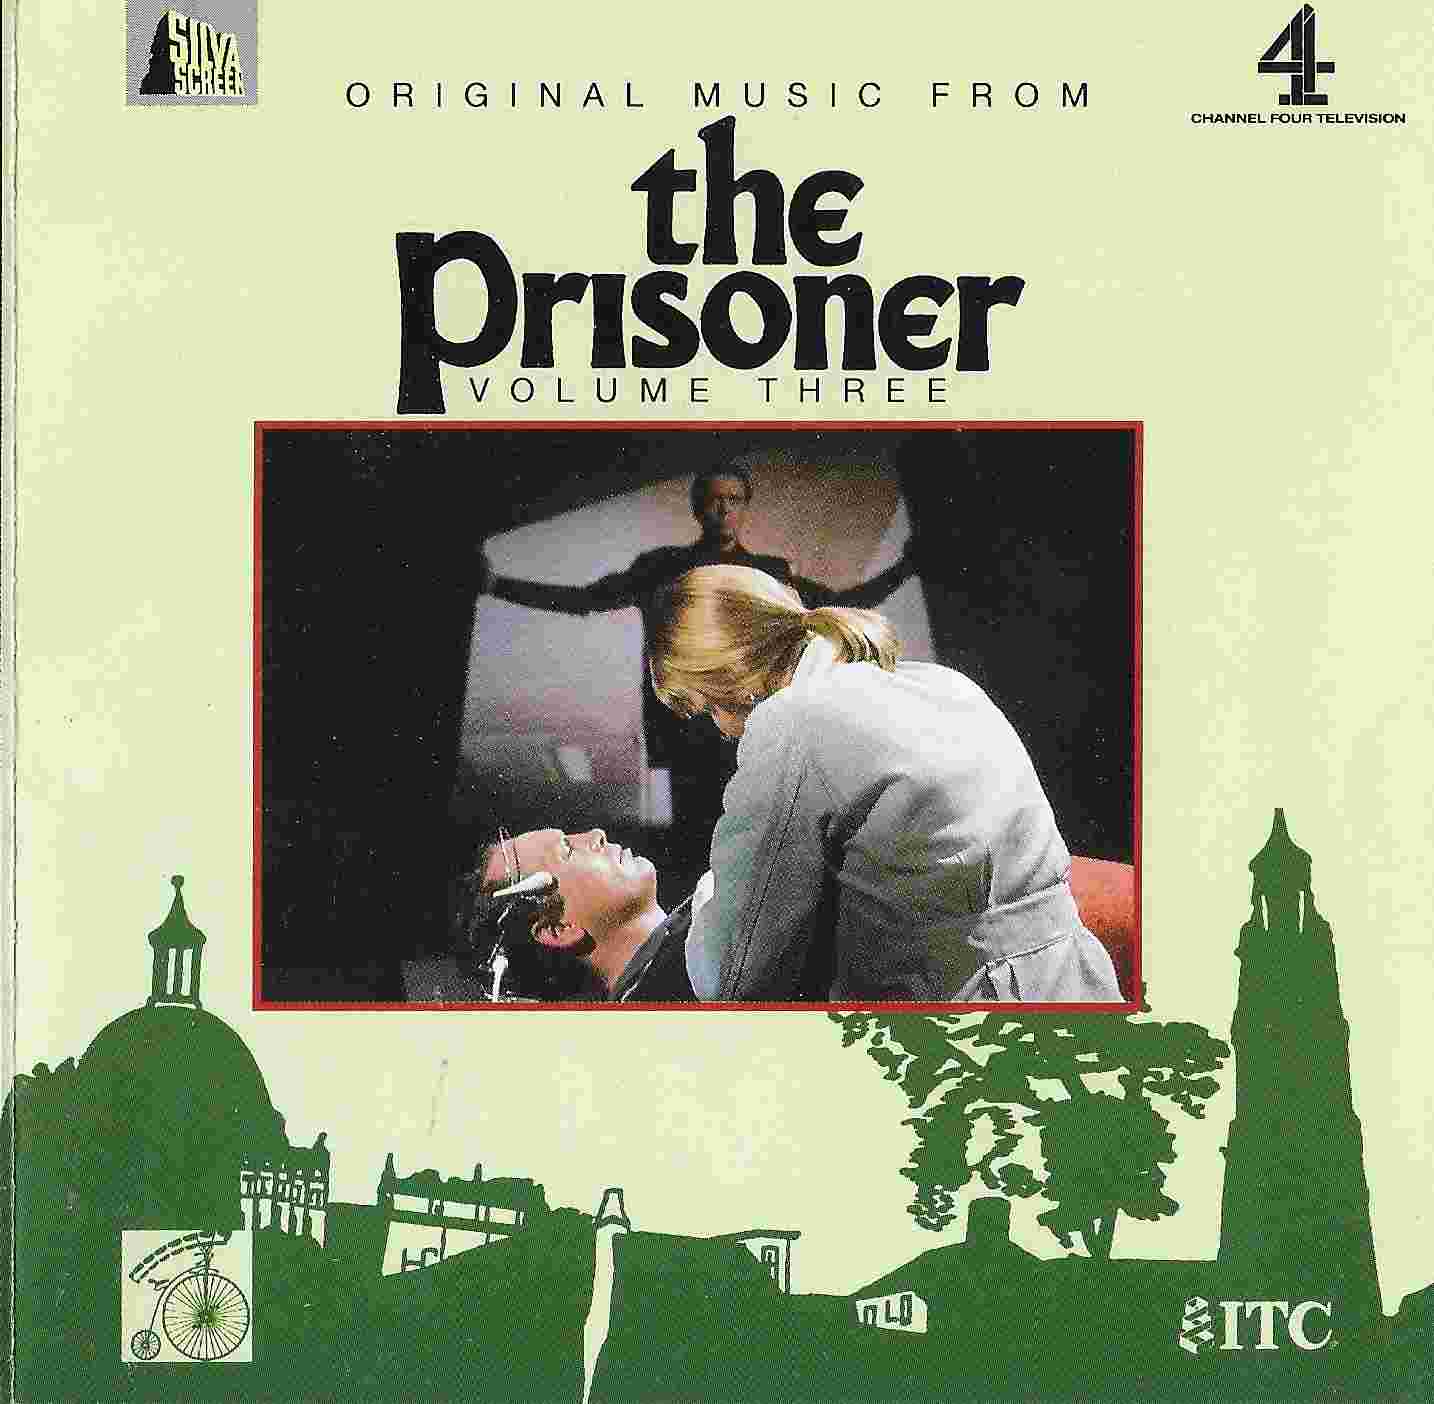 Picture of The prisoner - Volume 3 by artist Various from ITV, Channel 4 and Channel 5 cds library